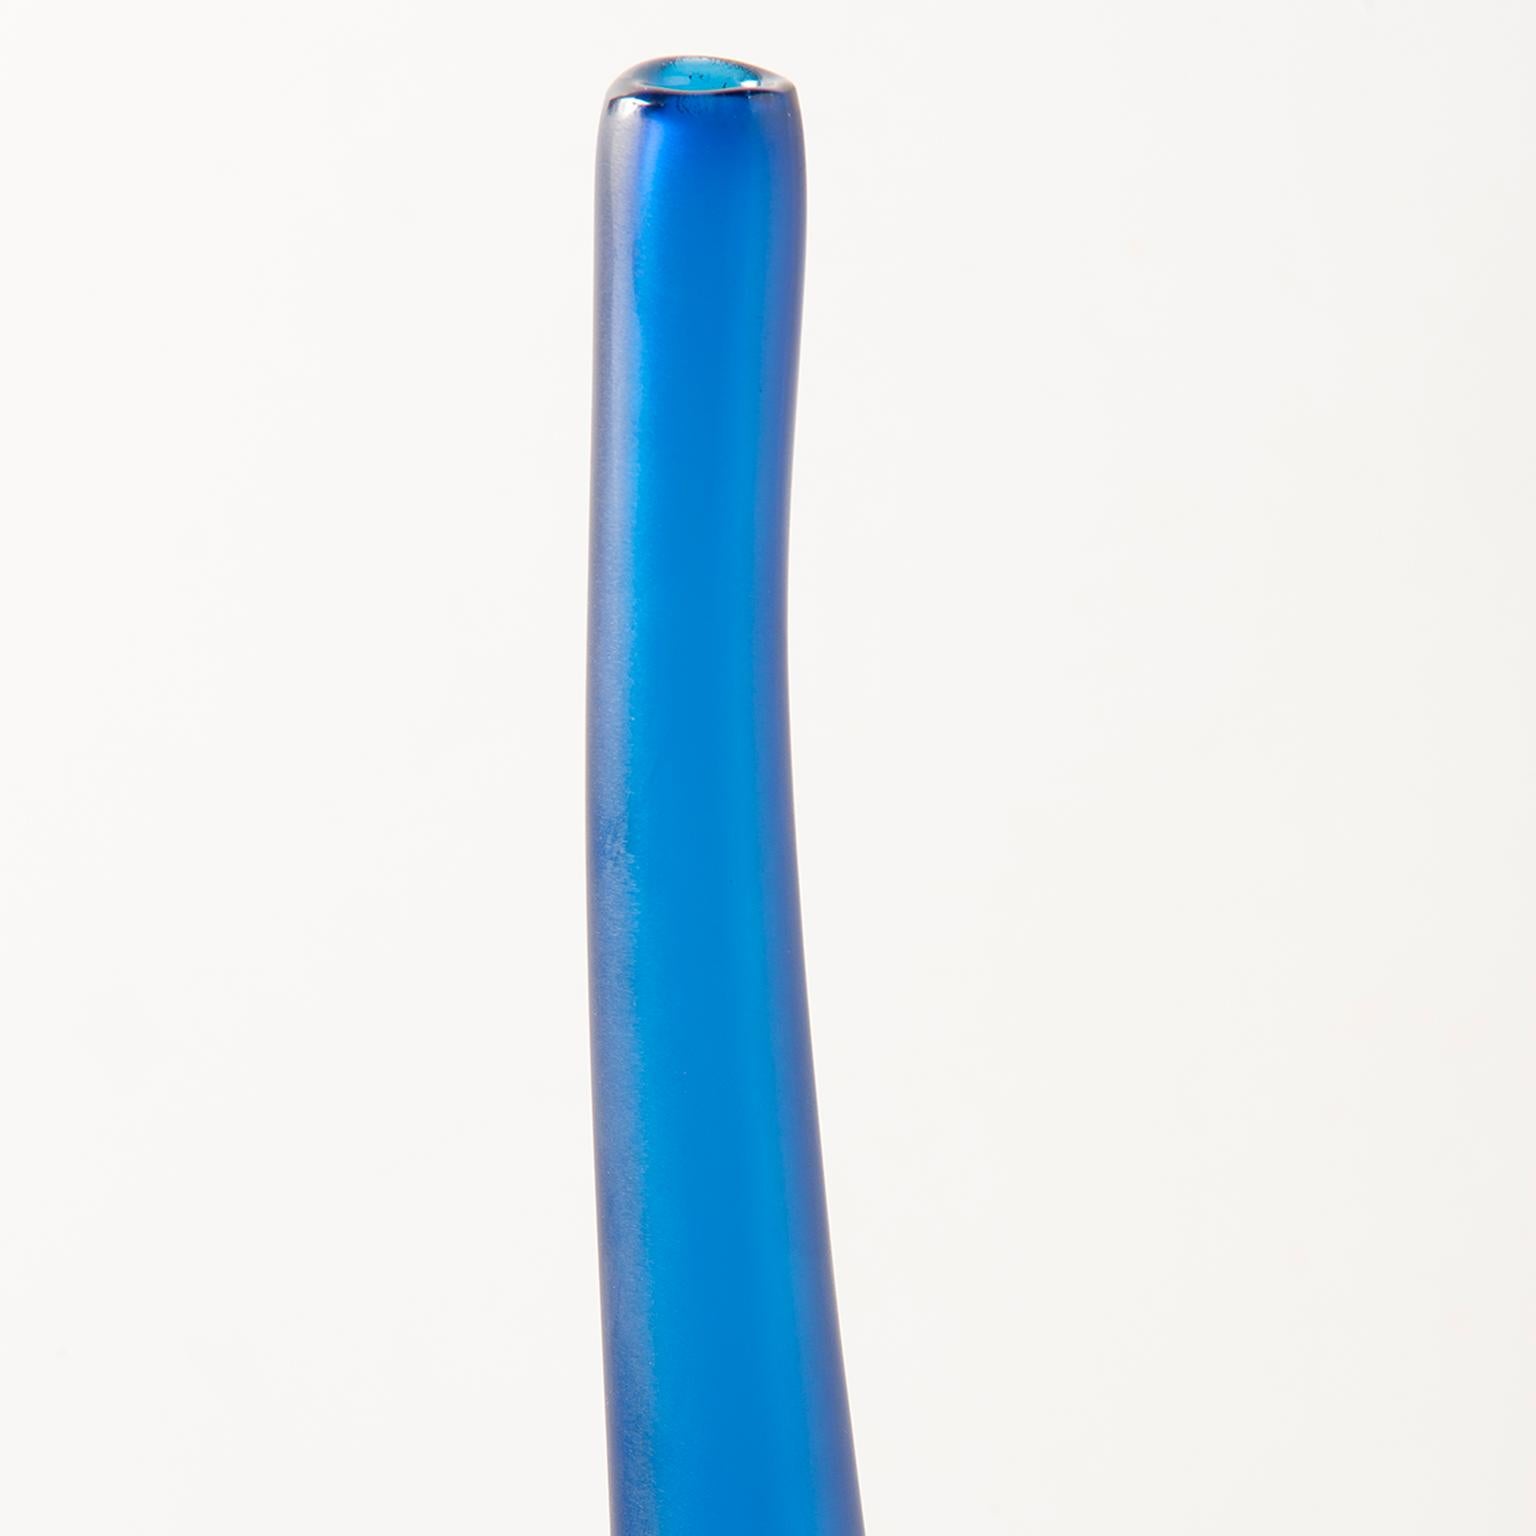 Designed and signed by artist Laura de Santillana for arcade Murano glass, handblown vase is #272 from a limited edition of 300. Just under two feet tall, this narrow vase is Aegean blue. New, limited edition with no flaws found.
 